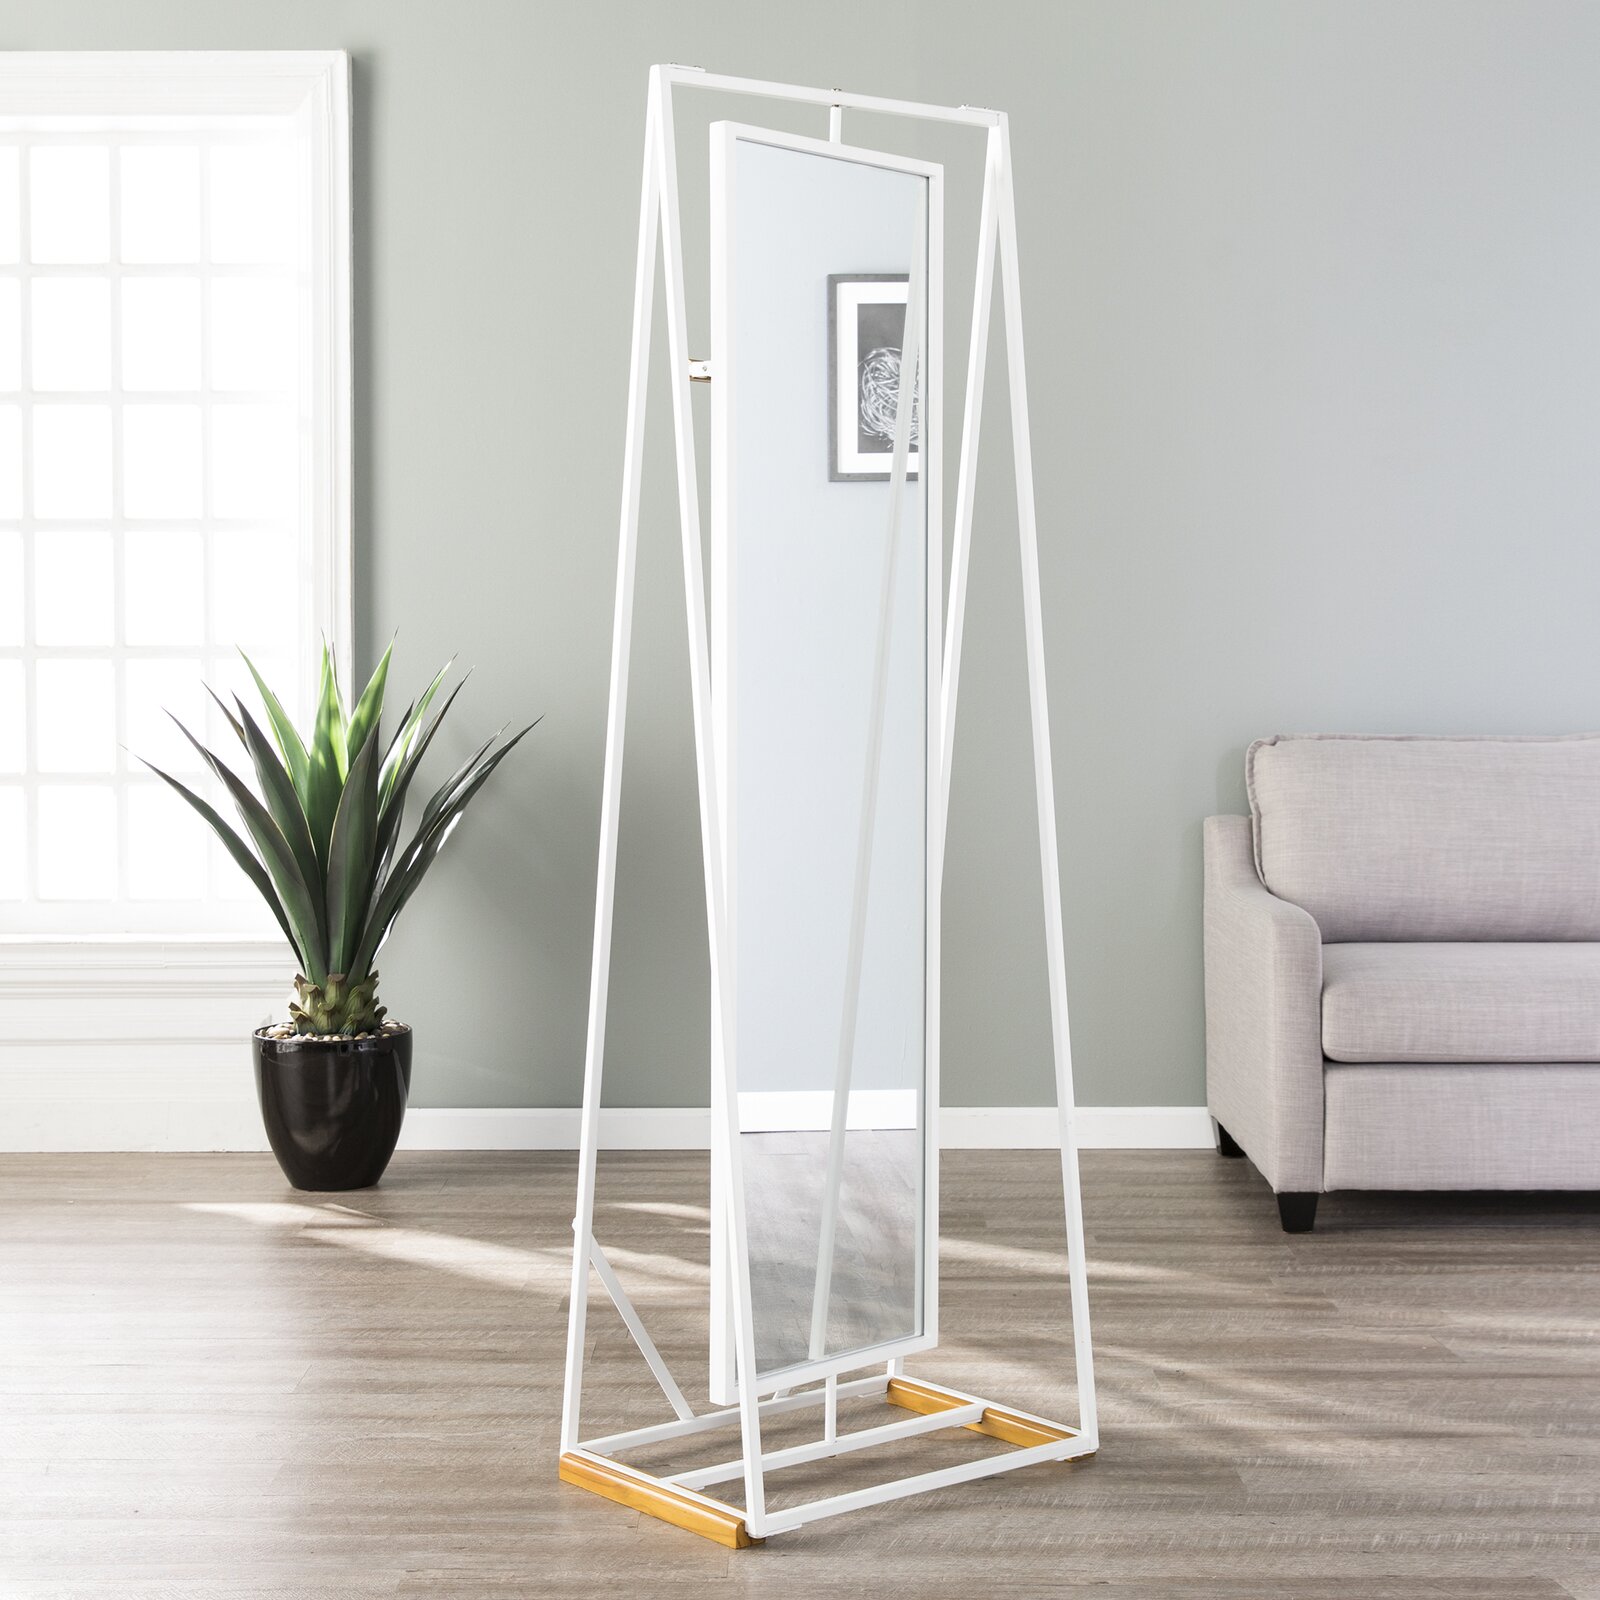 51 Full Length Mirrors To Flatter Your, Standing Mirror For Bedroom